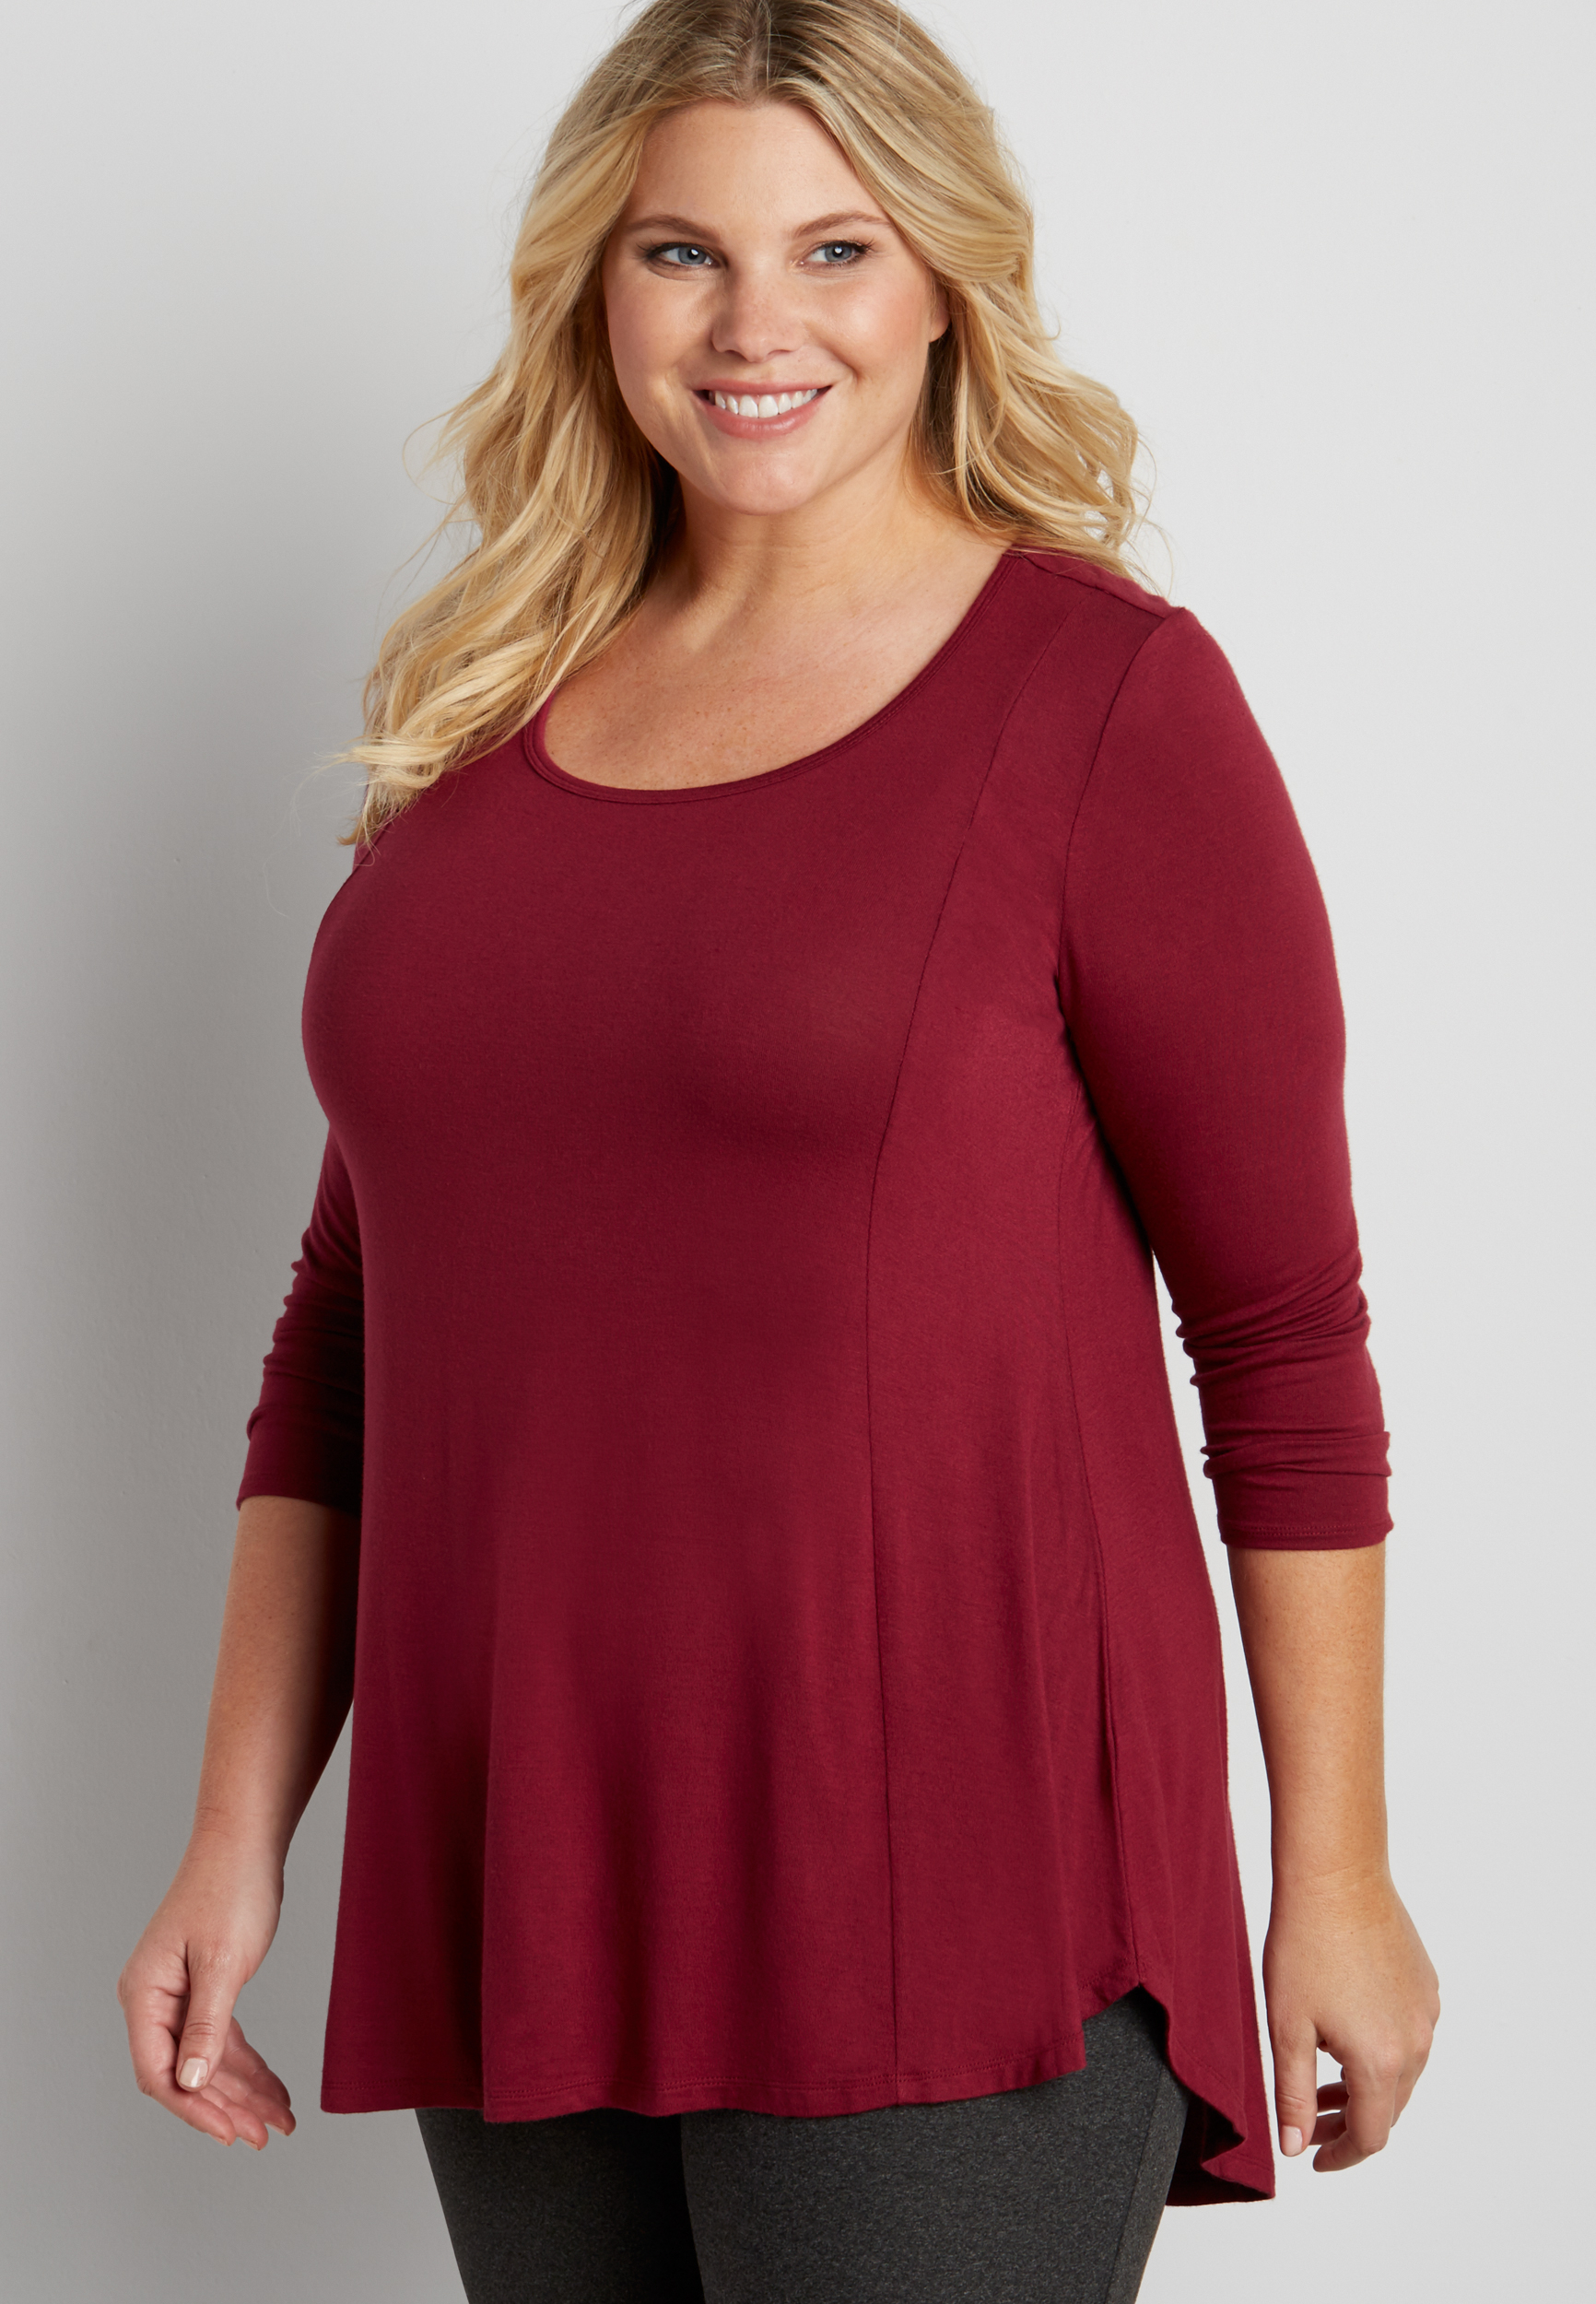 the 24/7 plus size swing tee with keyhole back and high-low hem | maurices